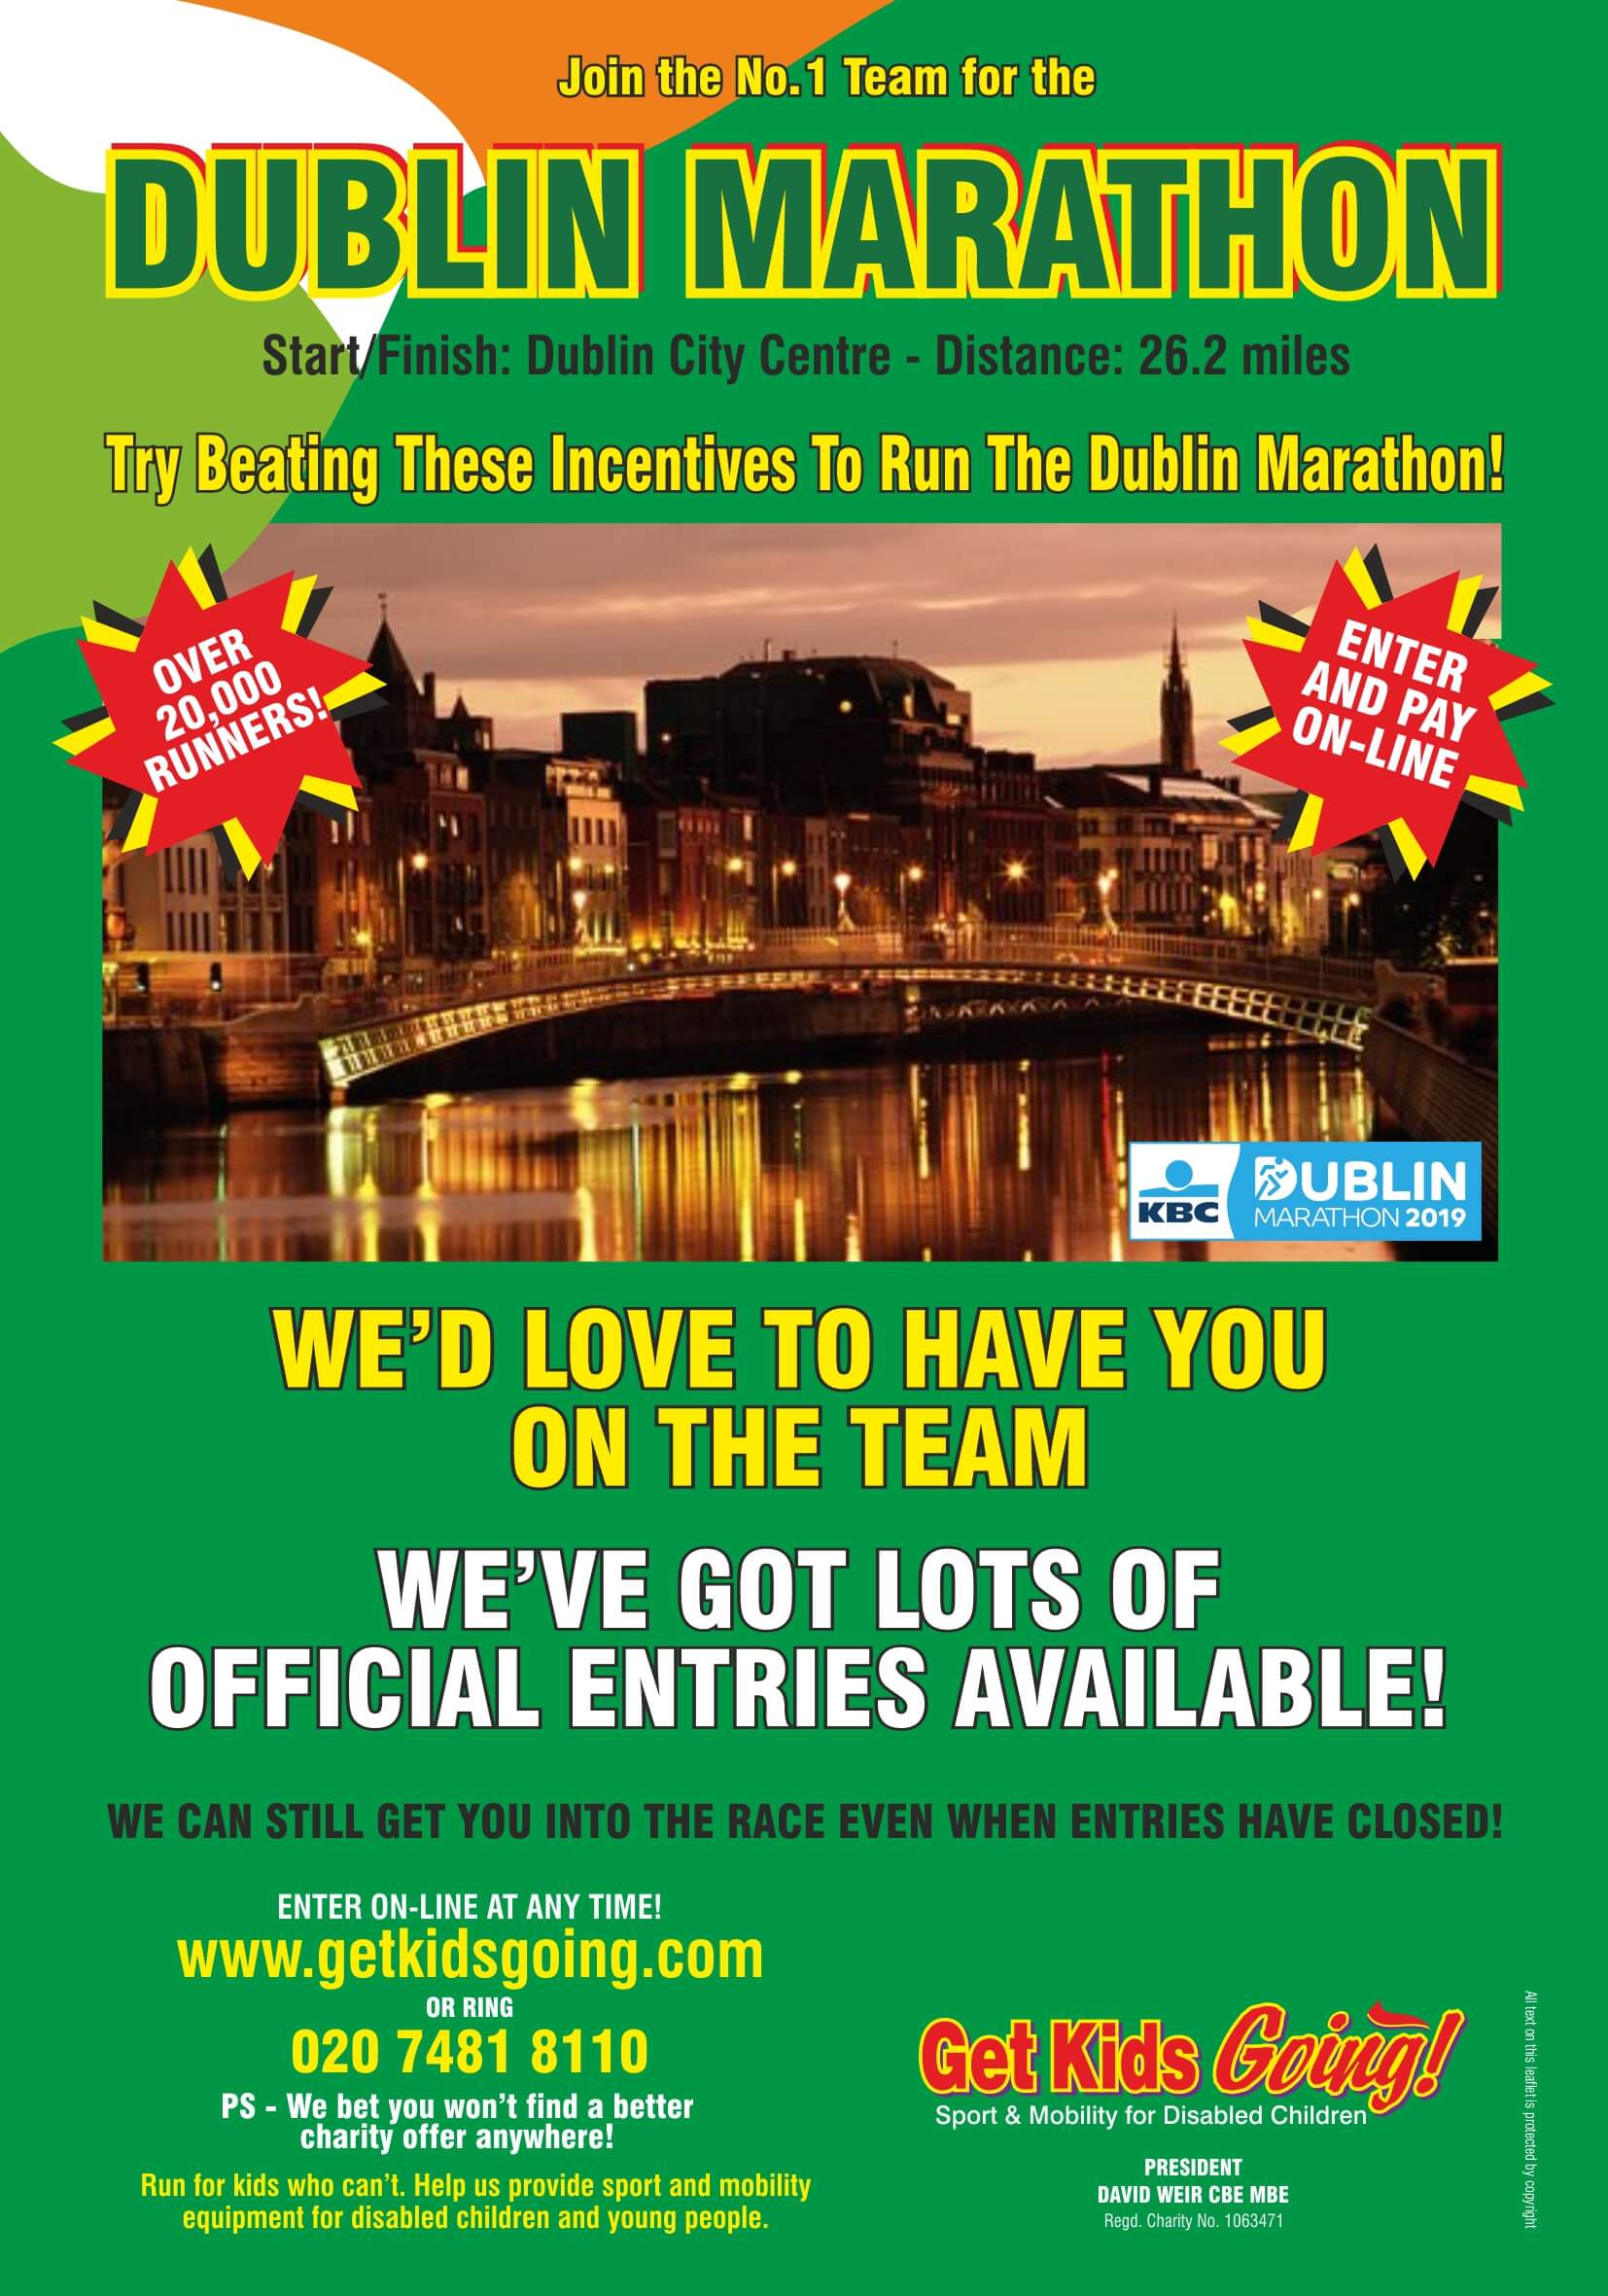 We have many guaranteed entry places available for the Dublin Marathon  2017 just waiting to be filled!  Get Kids Going! is a unique, national charity that gives disabled children and young people the wonderful opportunity of participating in sport. Help us to Turn their Dreams Into Reality.